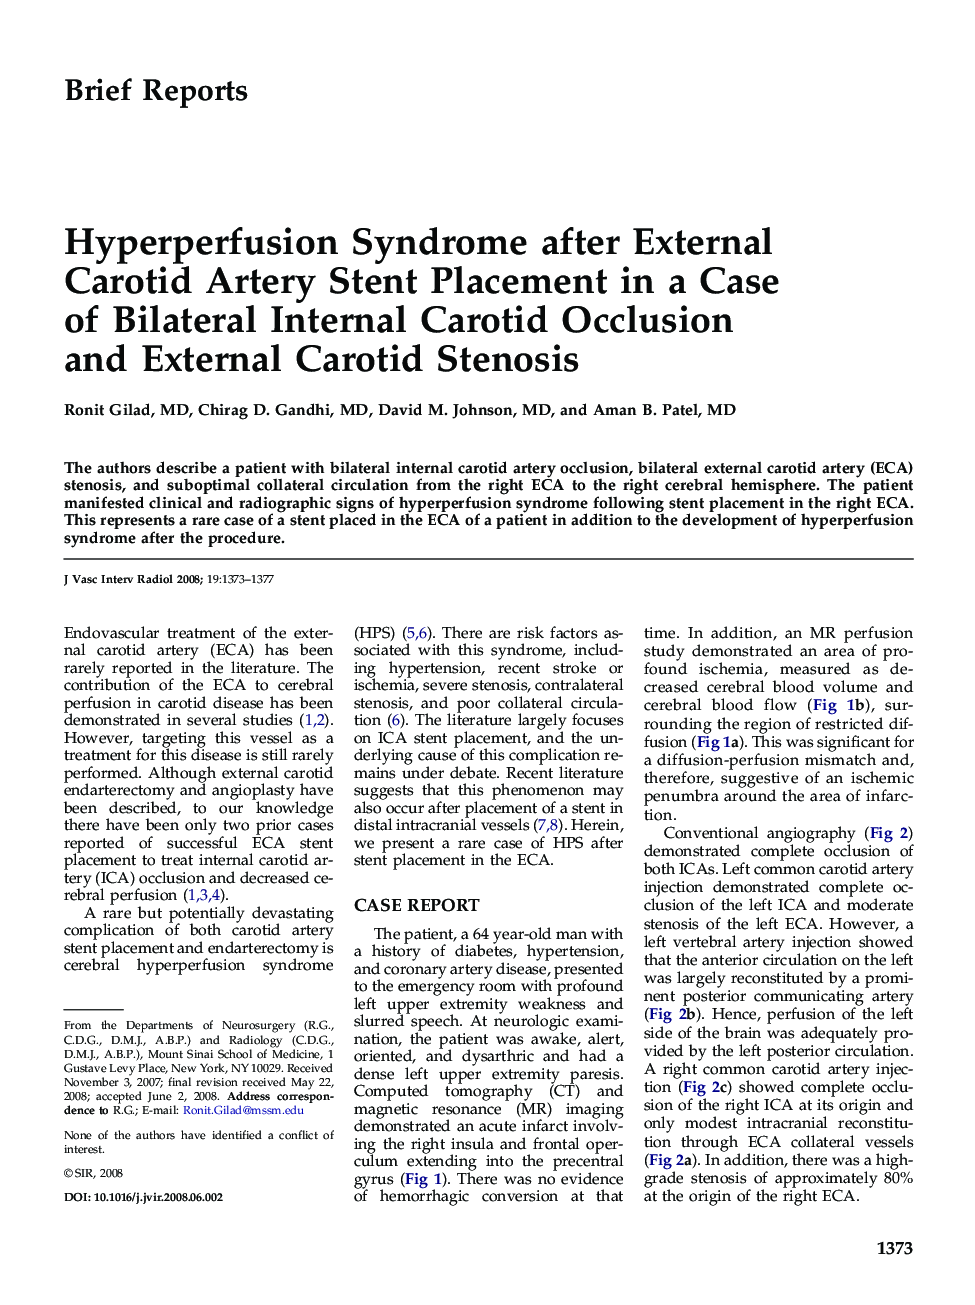 Hyperperfusion Syndrome after External Carotid Artery Stent Placement in a Case of Bilateral Internal Carotid Occlusion and External Carotid Stenosis